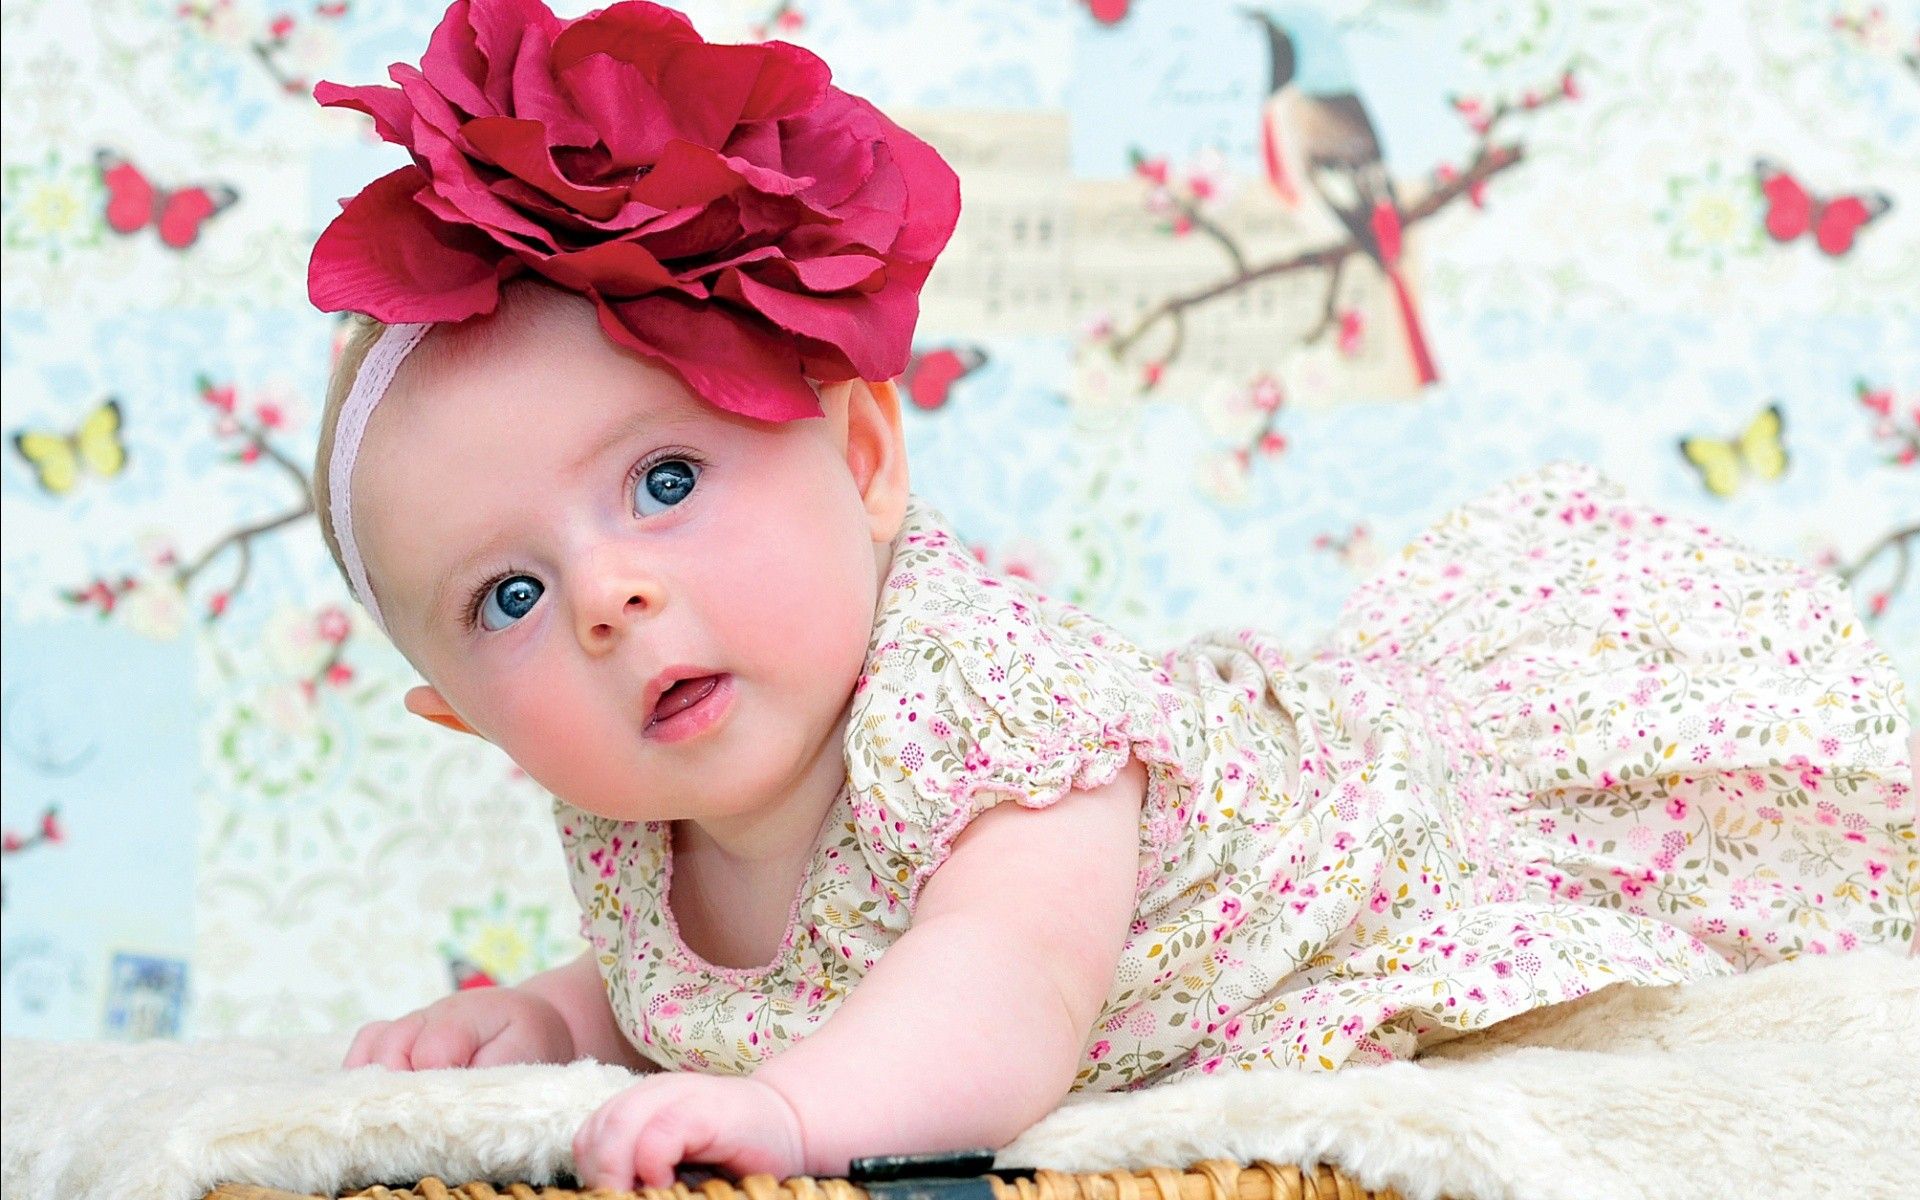 Cute Cute Child Flowers Wallpapers - Baby Girl Wallpapers Free Download -  1920x1200 Wallpaper 